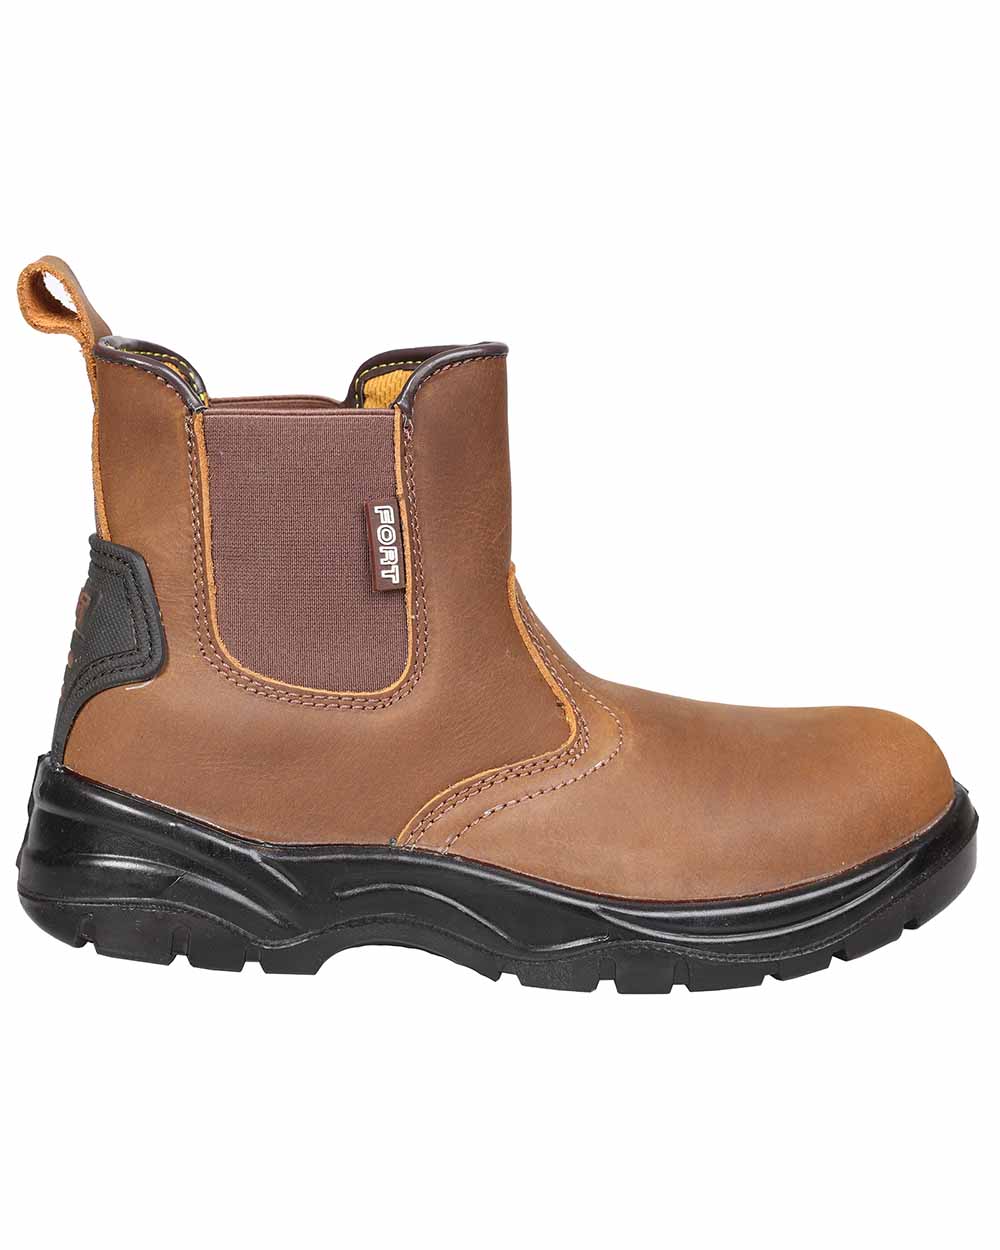 Brown leather Fort Regent Safety Boot